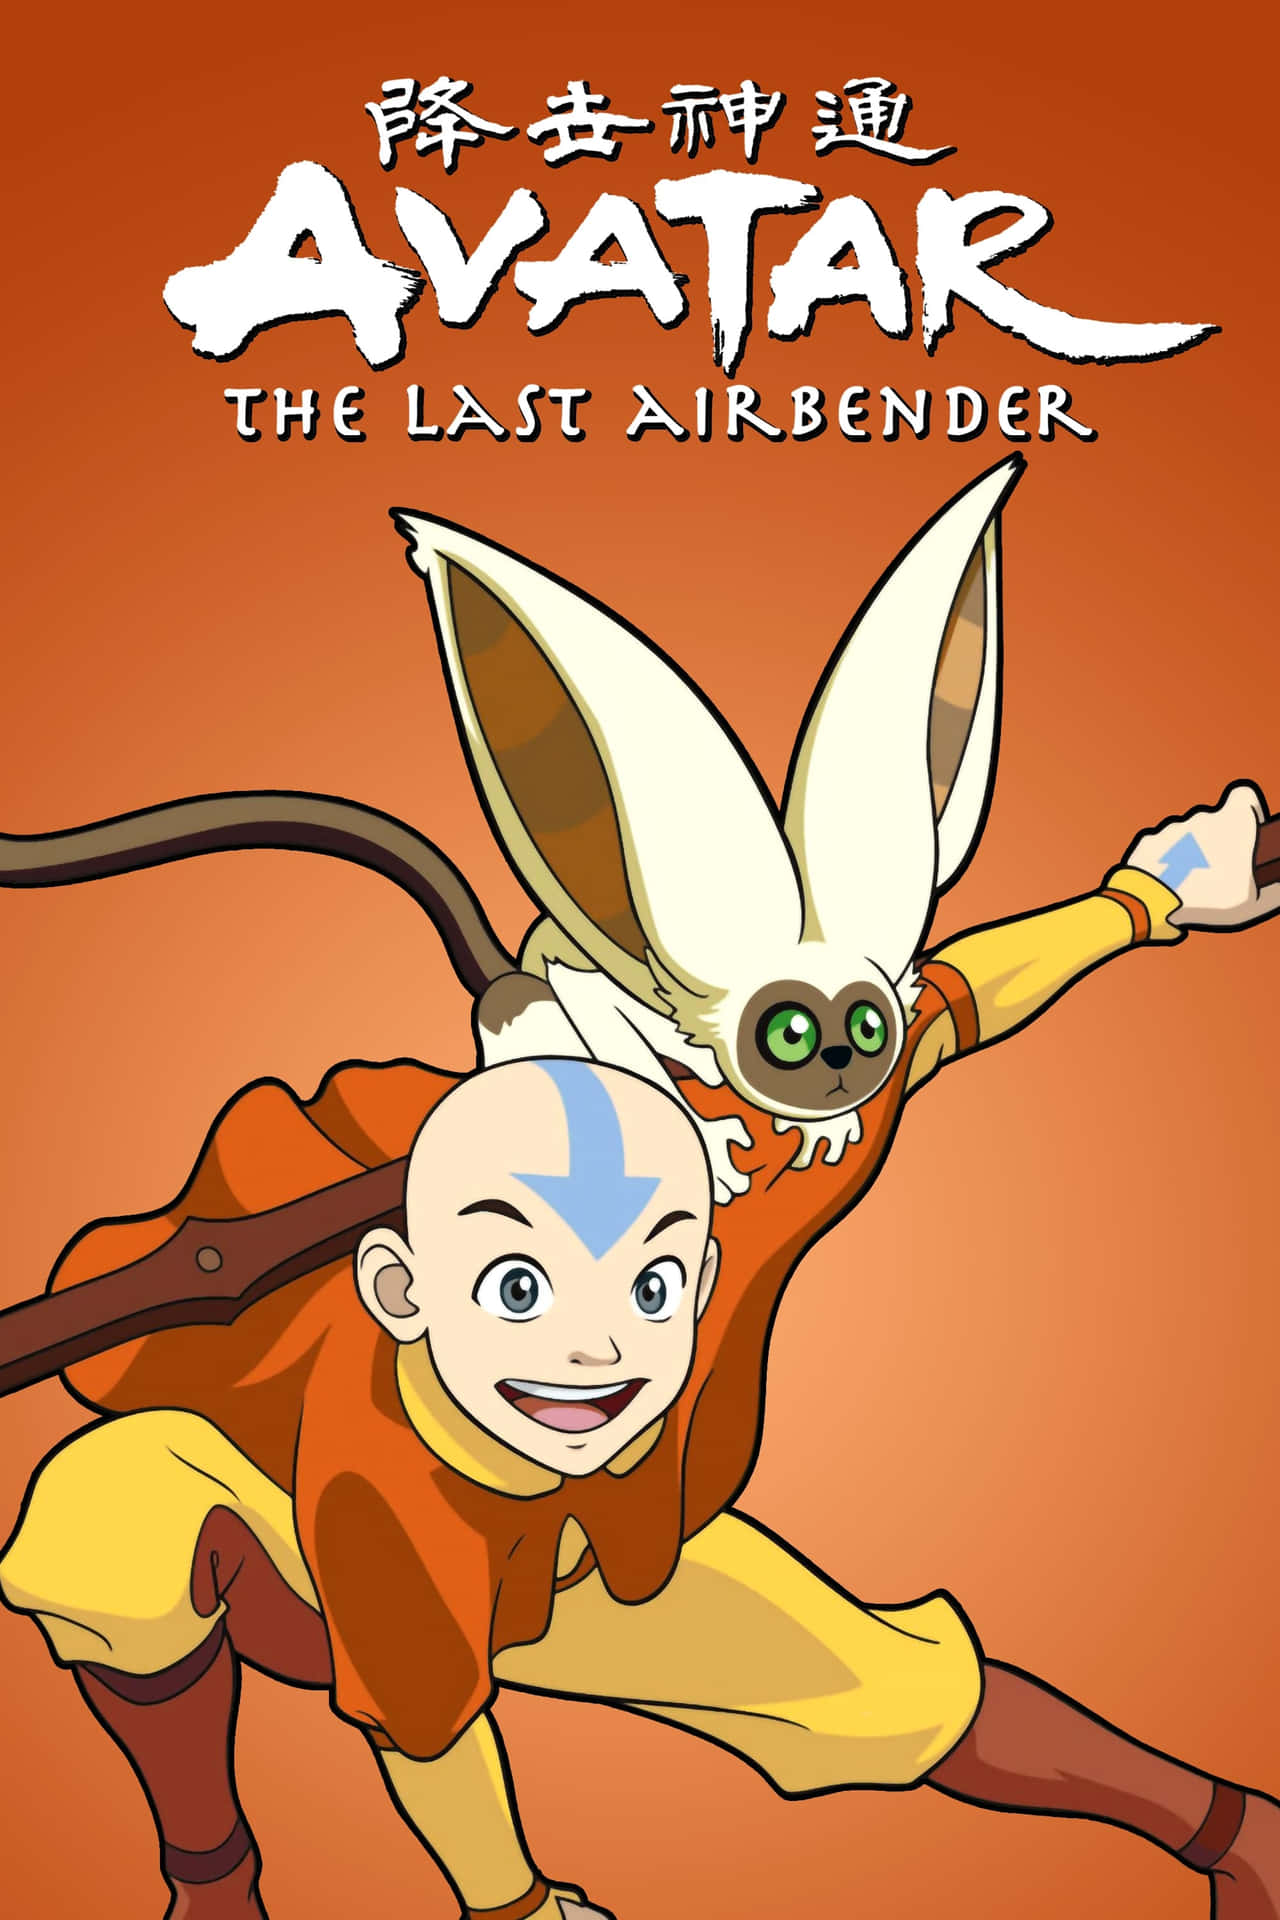 Aang shows his strength and power as he masters all four elements